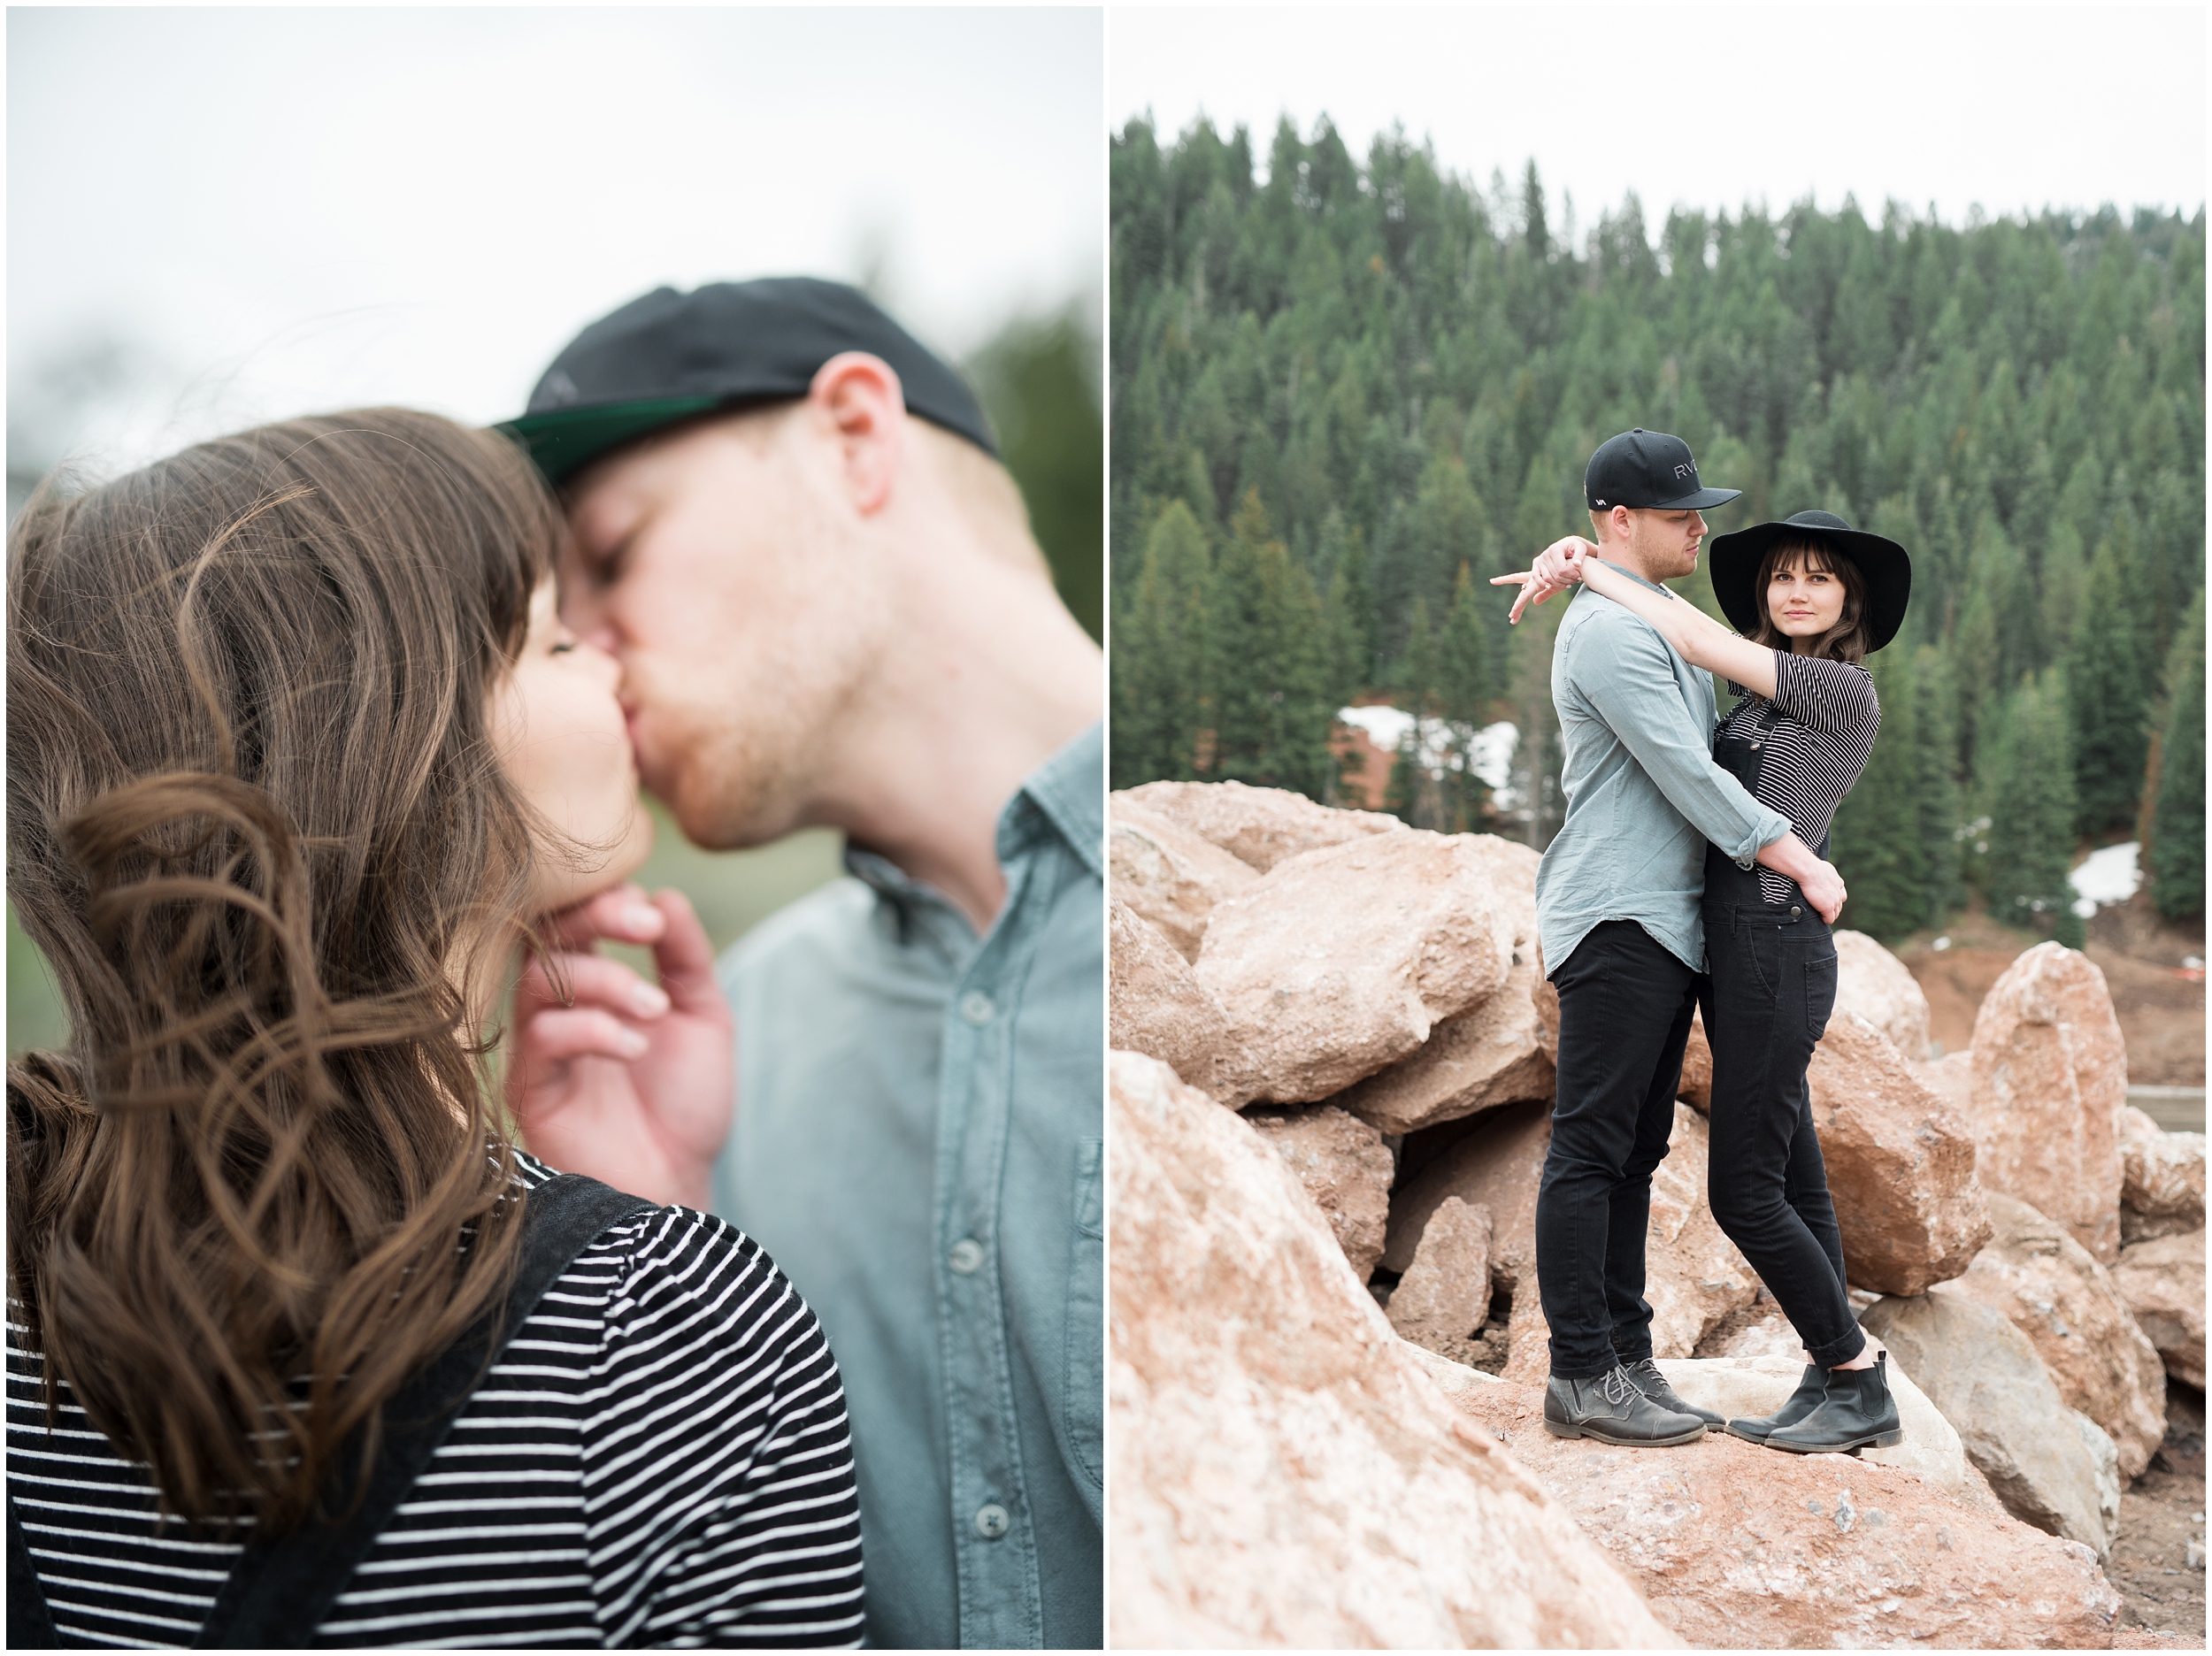 Mountainside engagements, red rock engagements, forest engagements, engagements in hats, field engagements, Utah senior photos, orchard senior photos, photographers in Utah, Utah family photographer, family photos Utah, Kristina Curtis photography, Kristina Curtis Photographer, www.kristinacurtisphotography.com